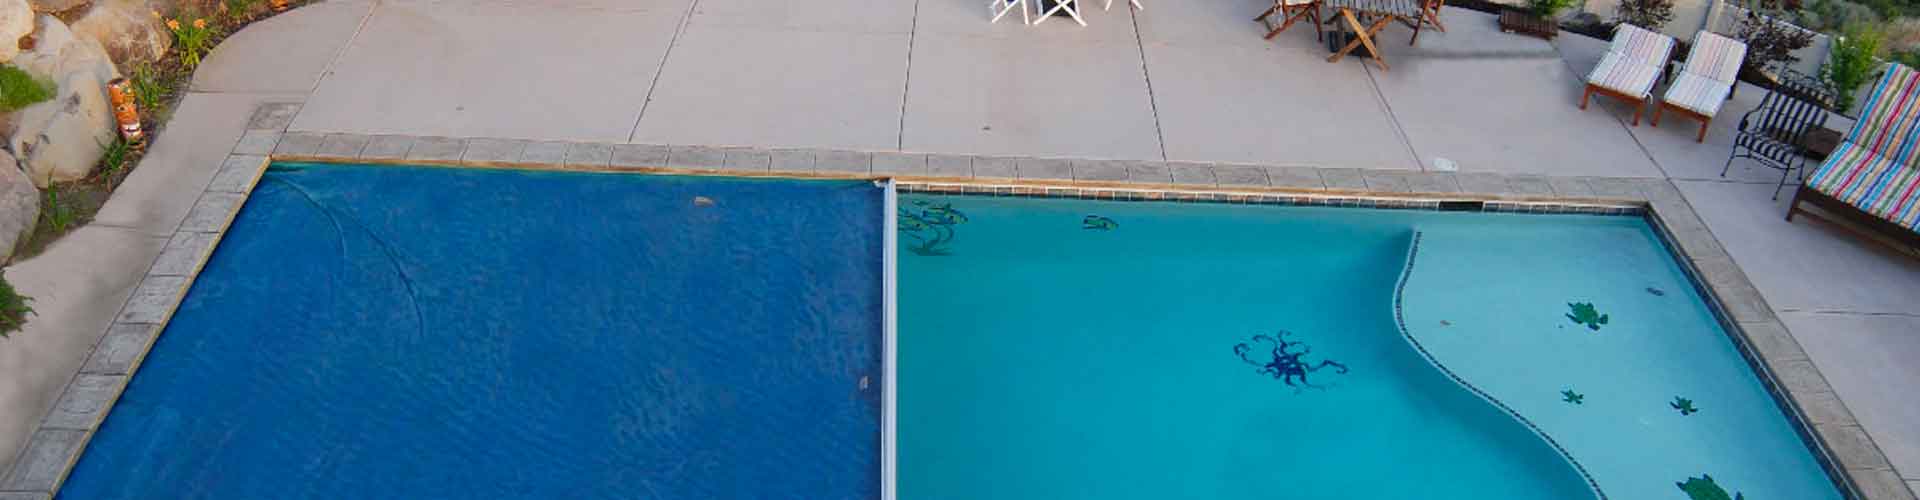 Essential equipment all pool owners should own